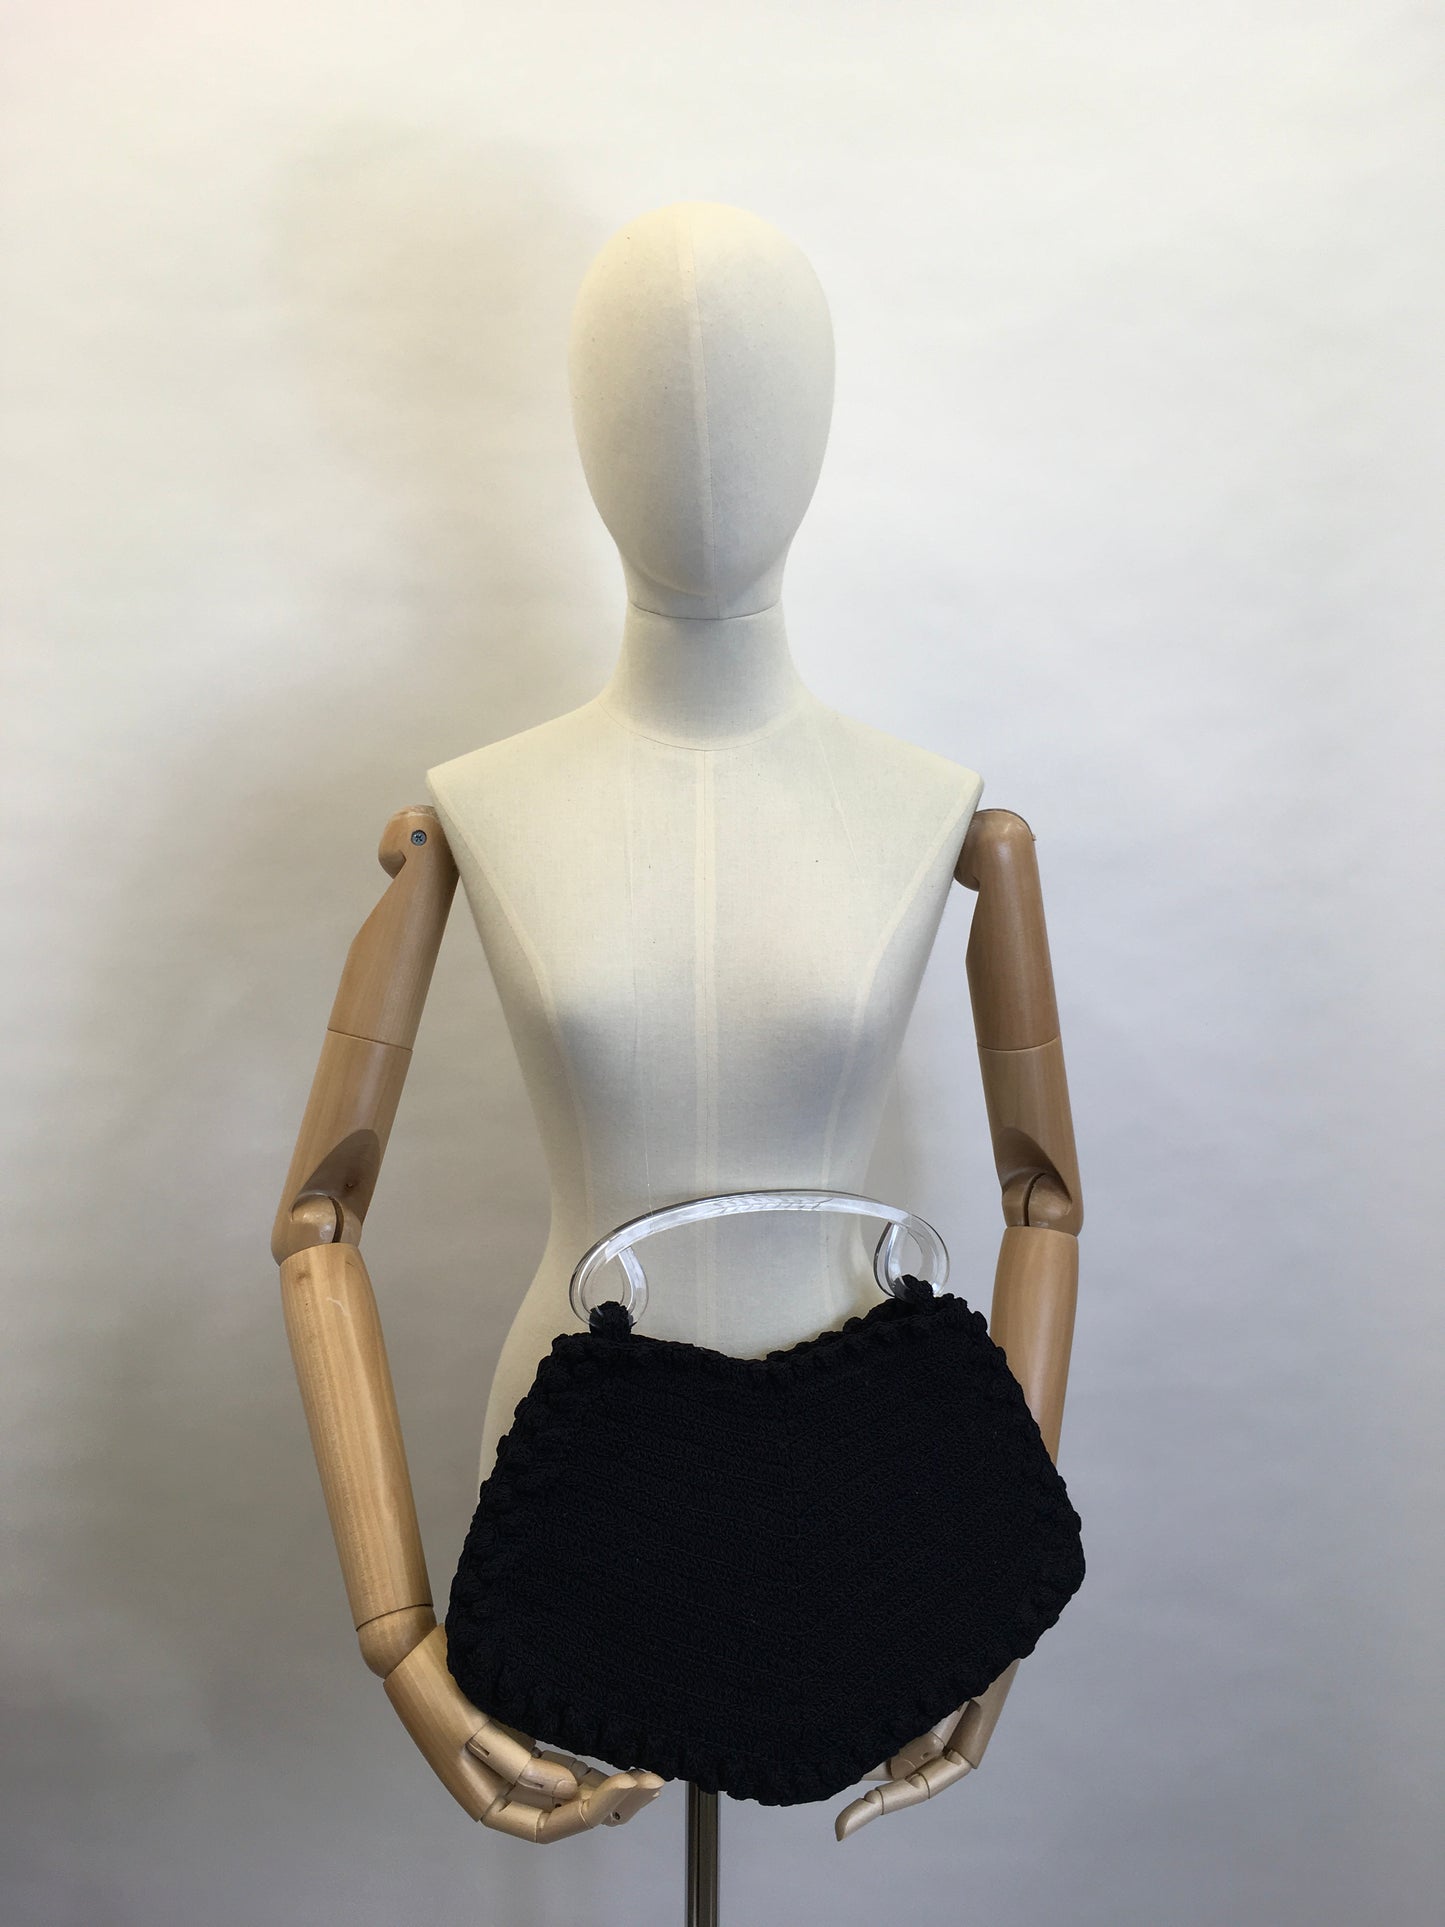 Original 1940’s Navy Crochet Bag in An unusual Shape -  With Gorgeous Lucite Handles